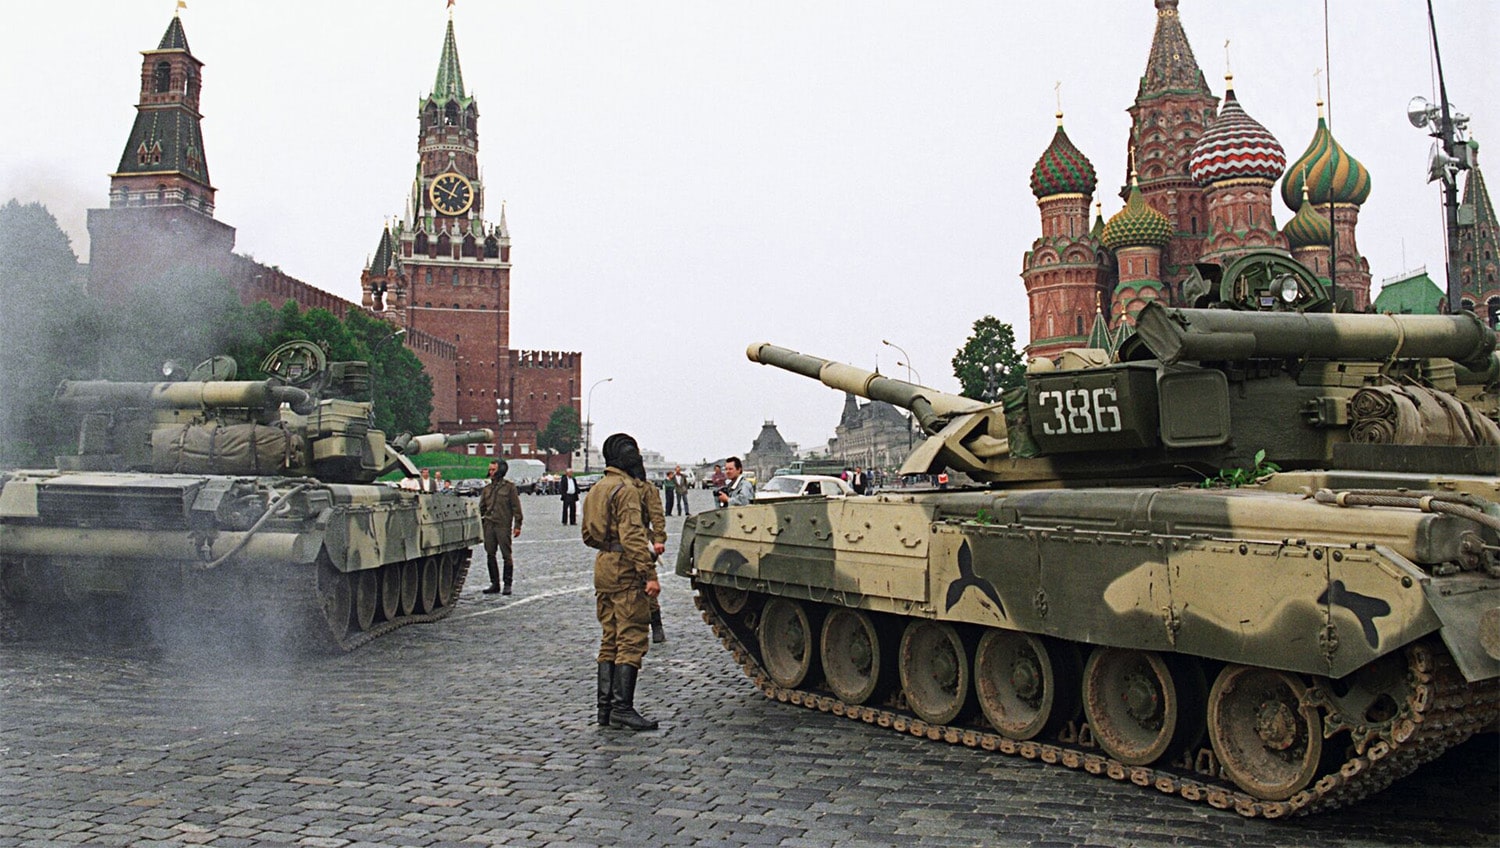 27 interesting facts about Fall of the Soviet Union